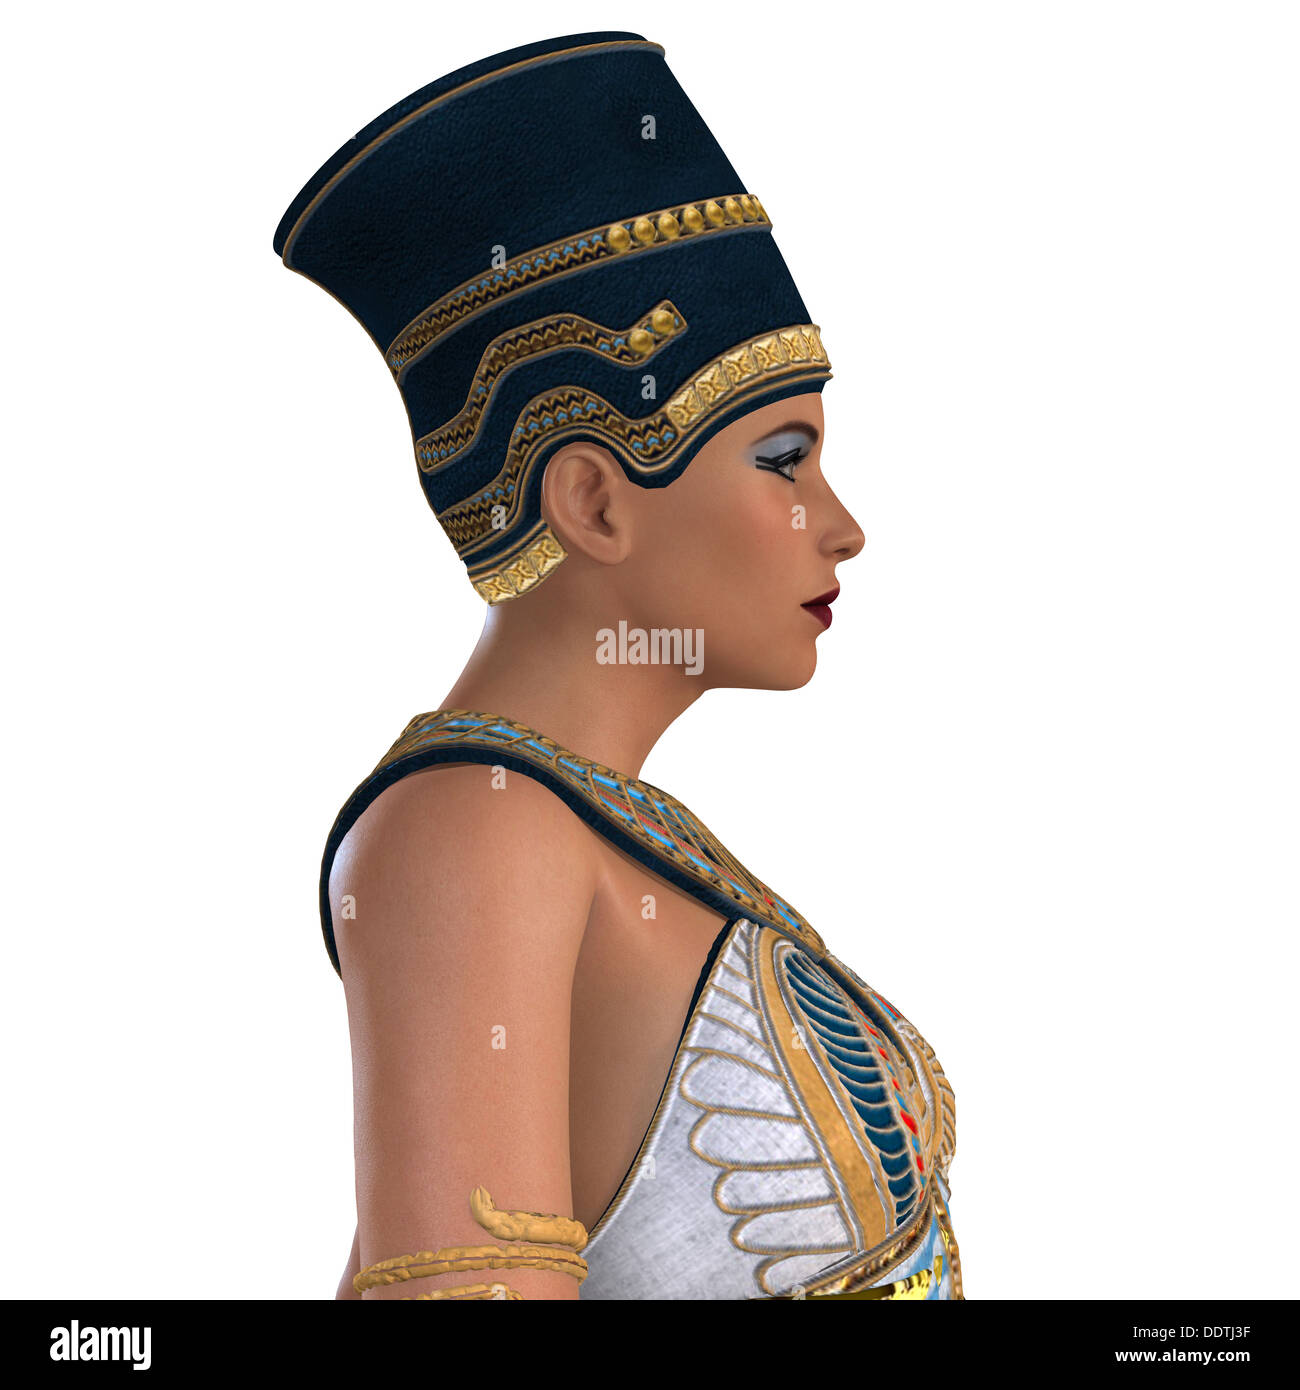 stock queen Alamy egyptian Ancient images photography - hi-res and